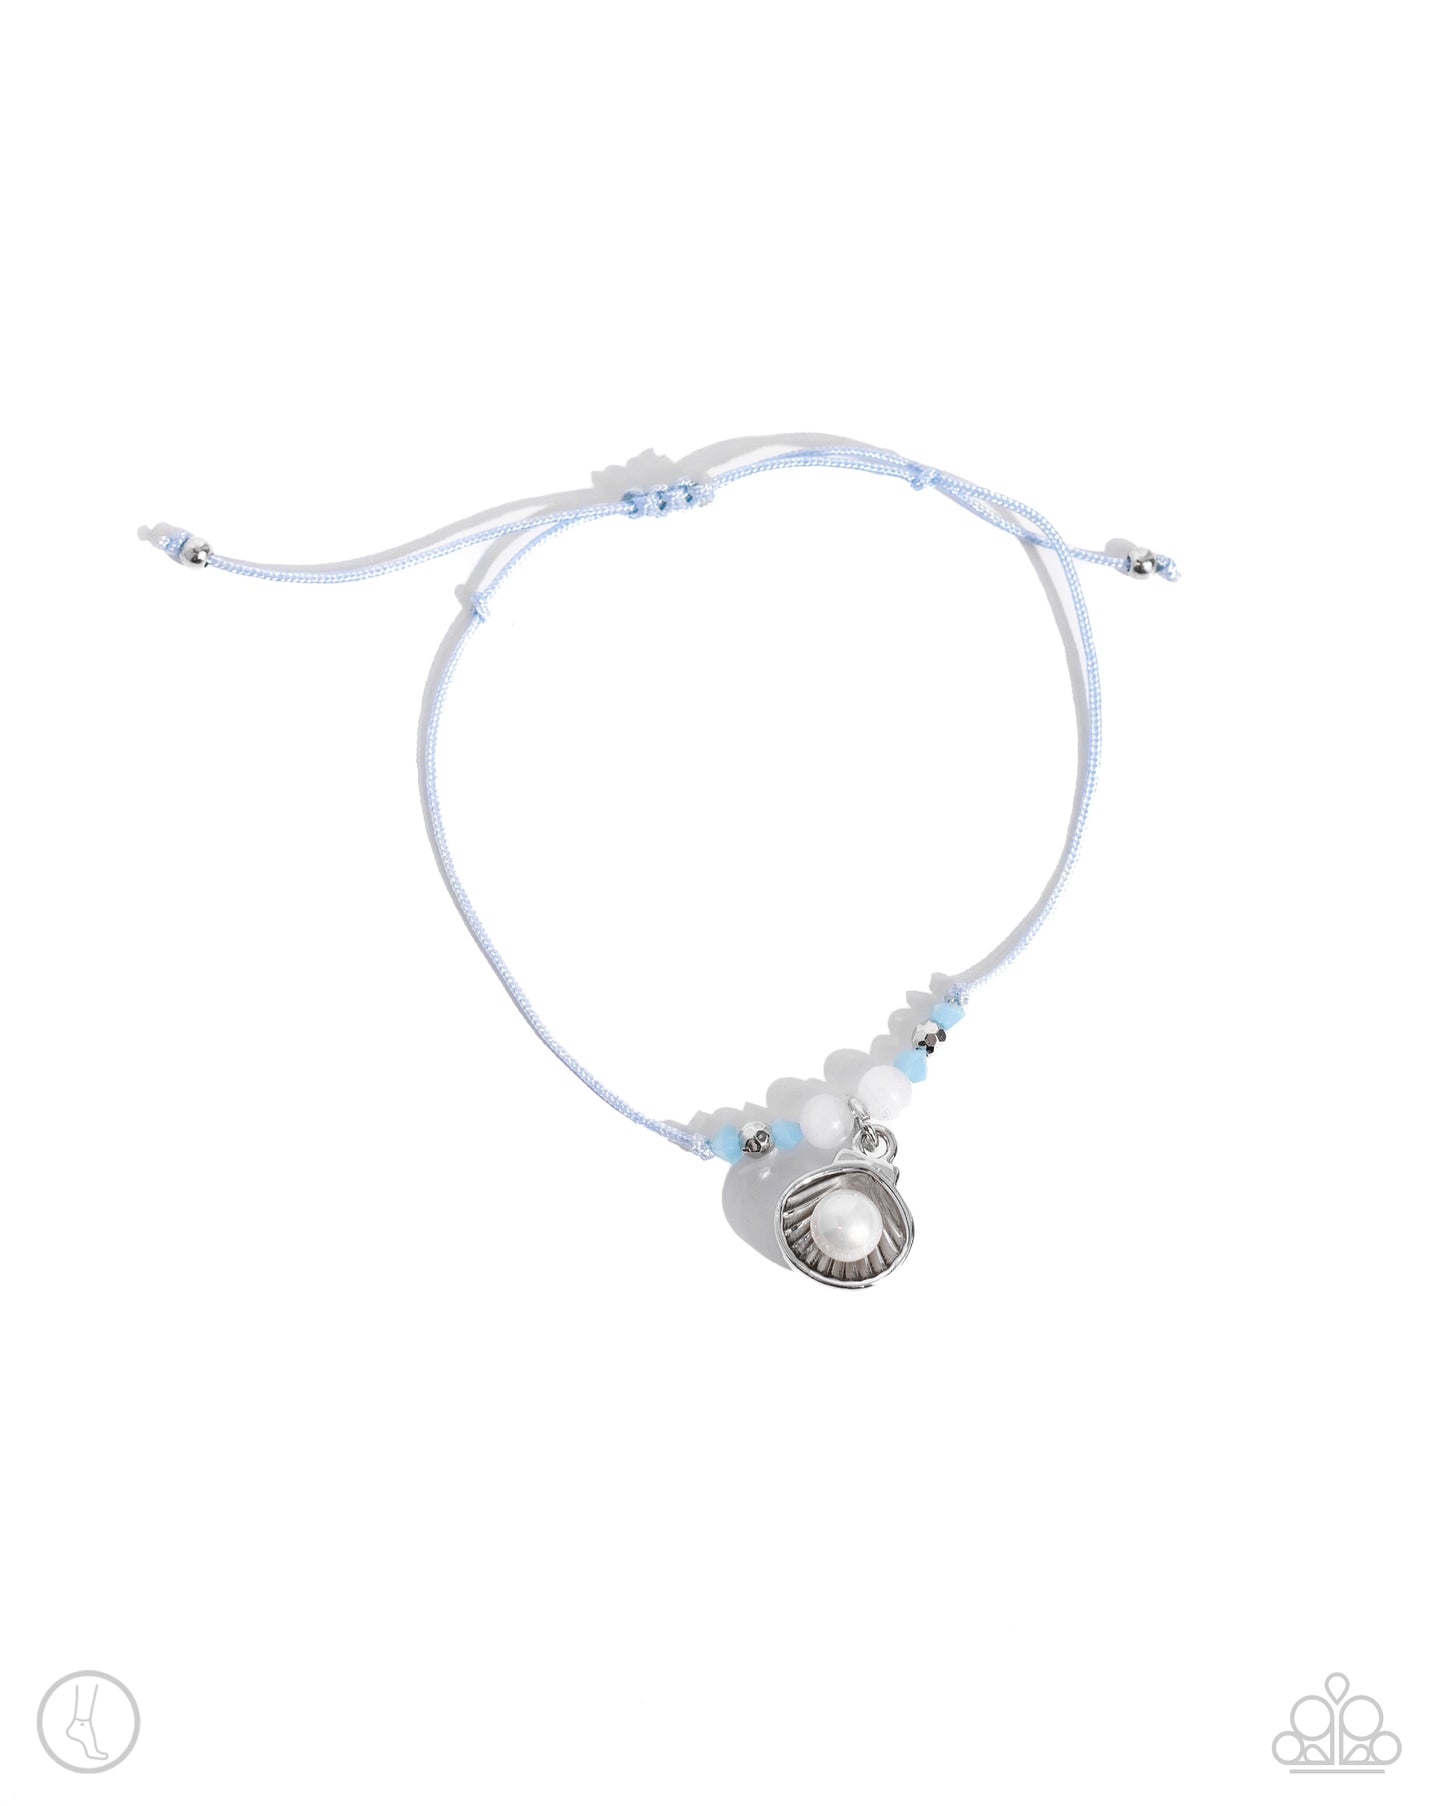 Oyster Overture Blue Anklet - Paparazzi Accessories Centered along the knots of a light blue braided cord, a collection of textured silver and cloudy beads, and a pearl centered in a silver oyster shell wraps around the ankle for a beachy basic. Features an adjustable sliding knot closure. Sold as one individual anklet. P9AN-BLXX-049XX